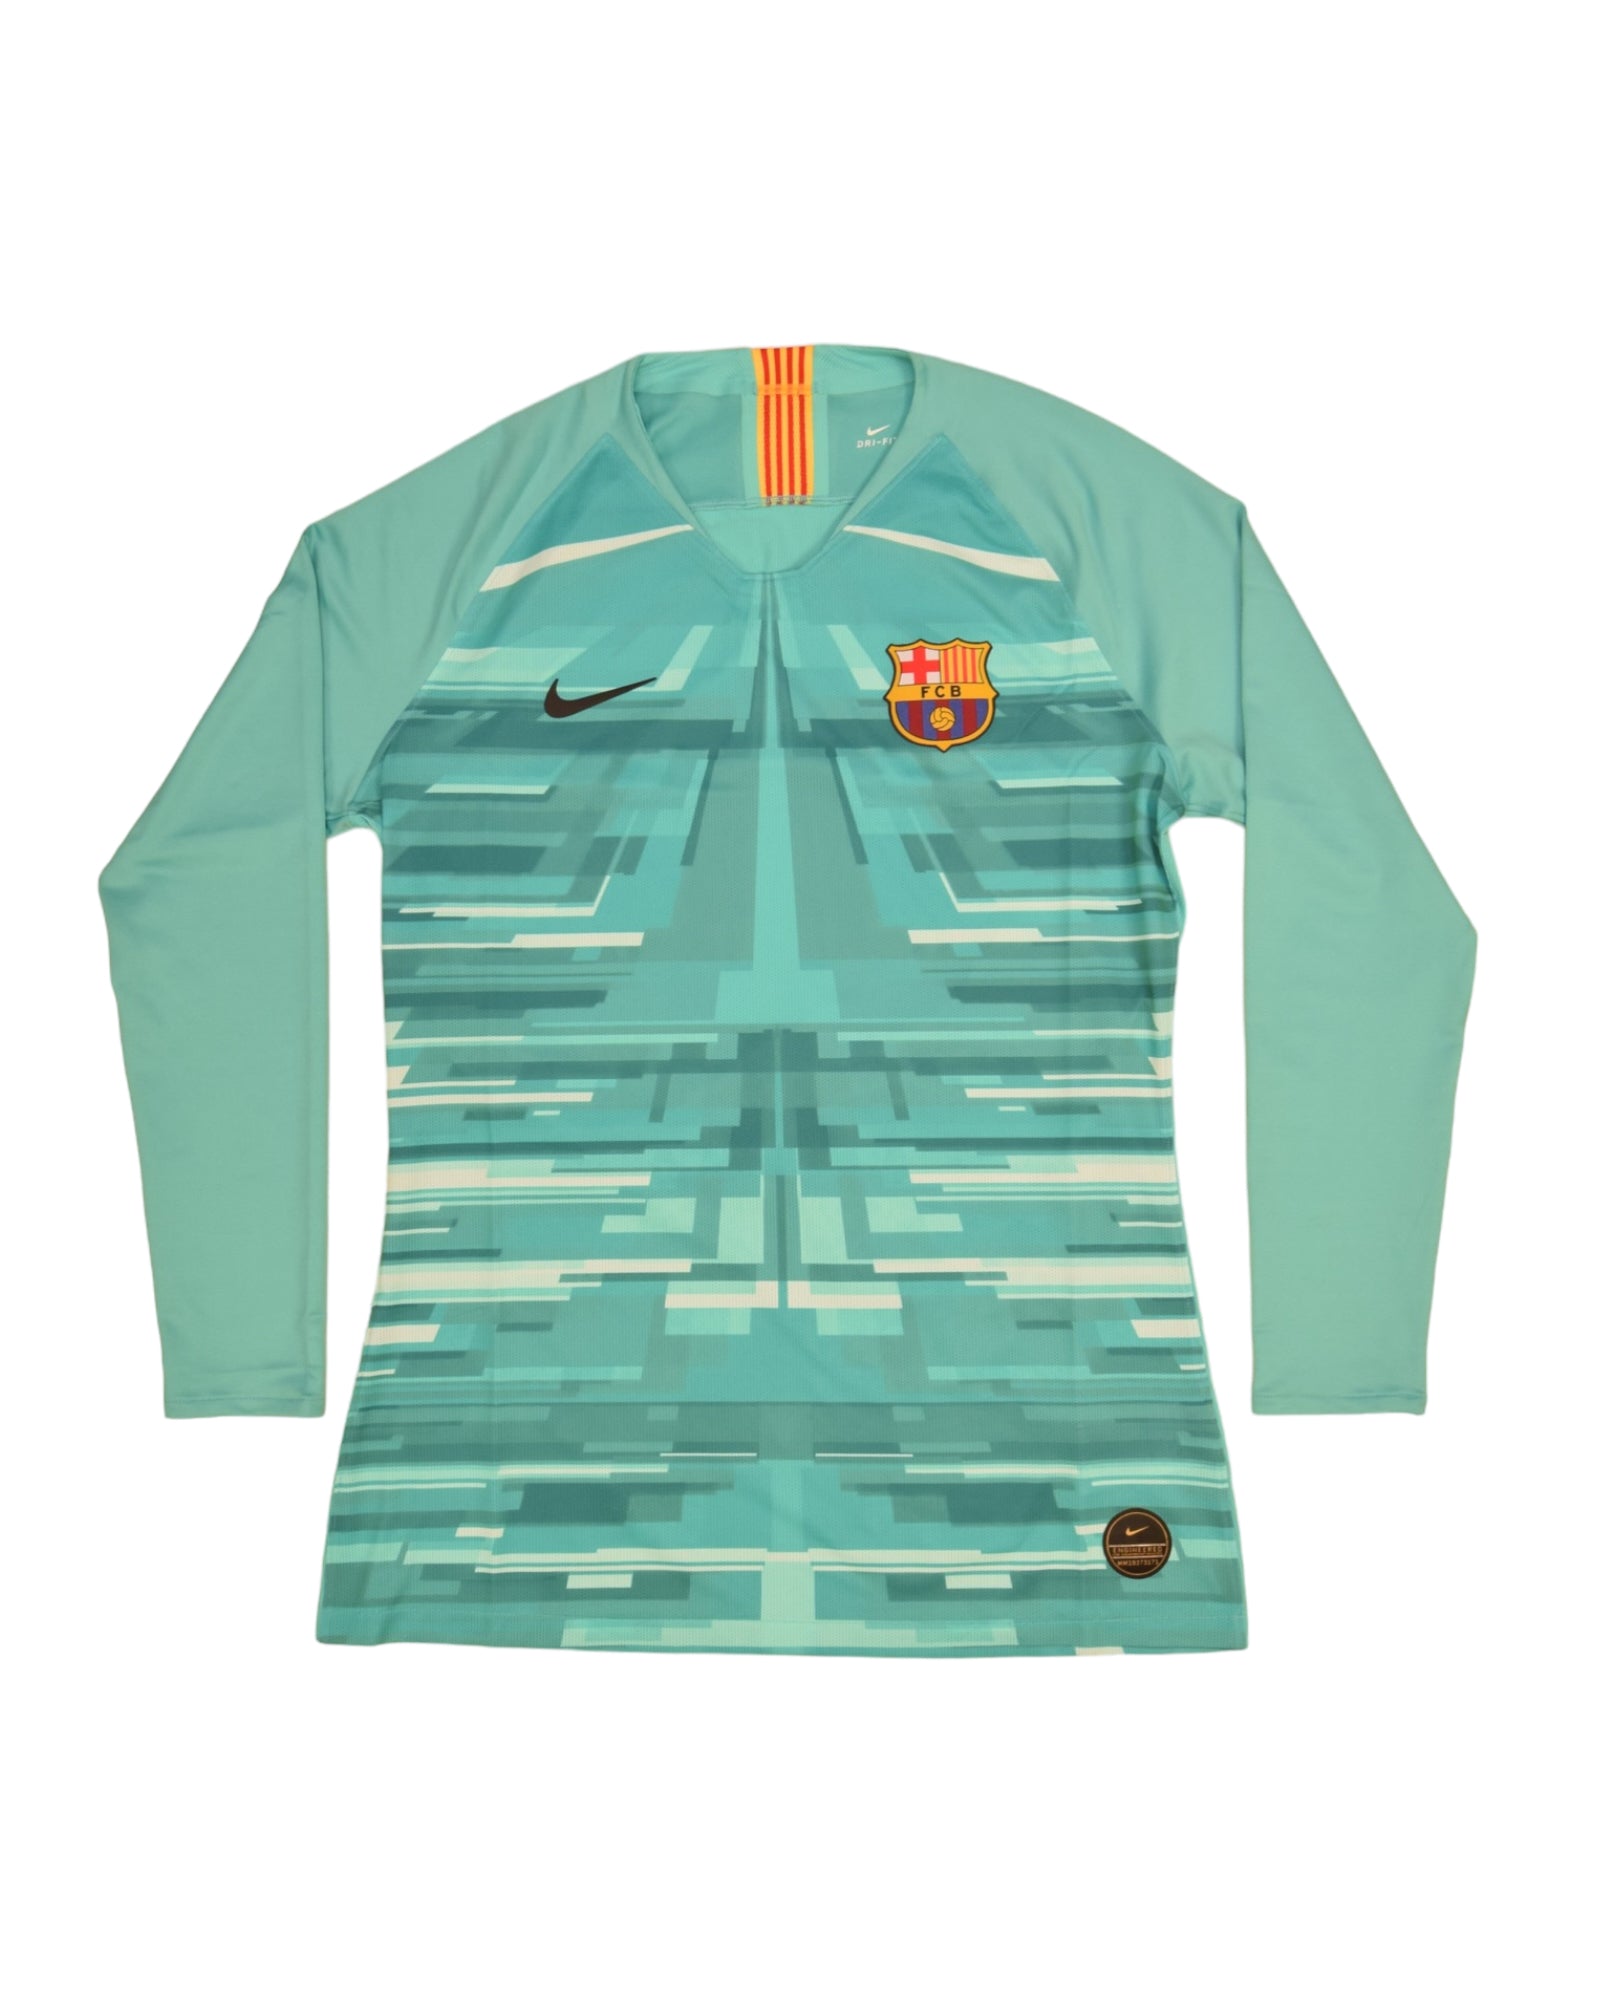 Authentic New Nike Barcelona 2019 - 2020 Goalkeeper GK. Player's Issue / Edition Home Football Shirt Green Size L